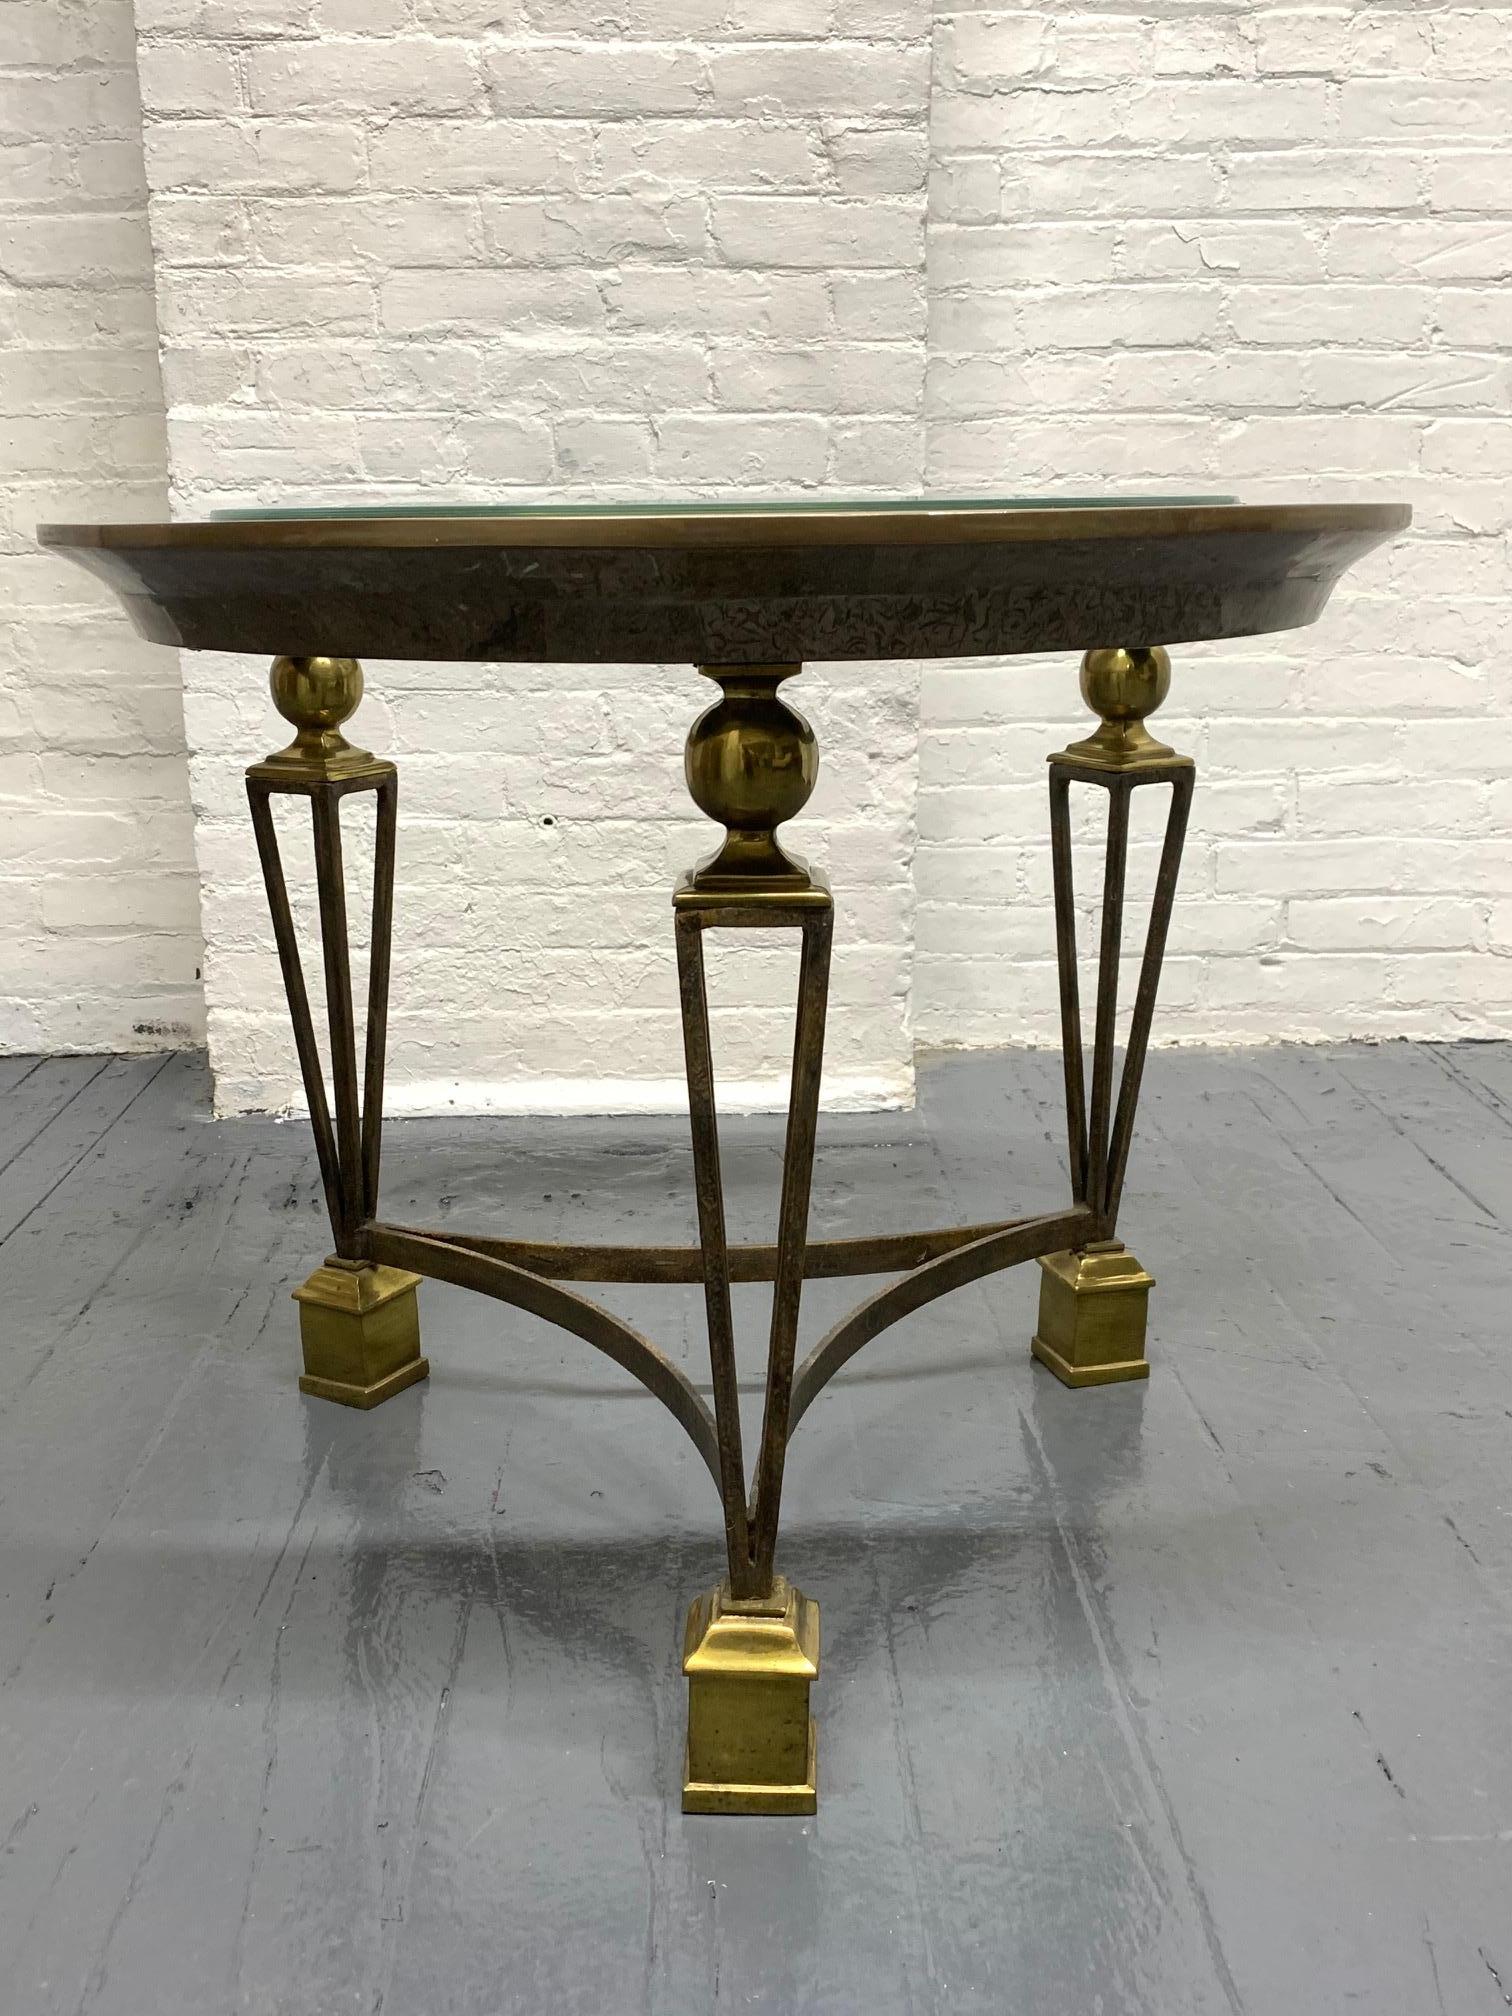 Well designed brass and glass top side table. The outer rim of the table is tessellated stone. Some scratches to the glass. Legs are wrought iron. The feet and round balls on top of the legs are brass. Nice squared feet. Manner of Gilbert Poillerat.